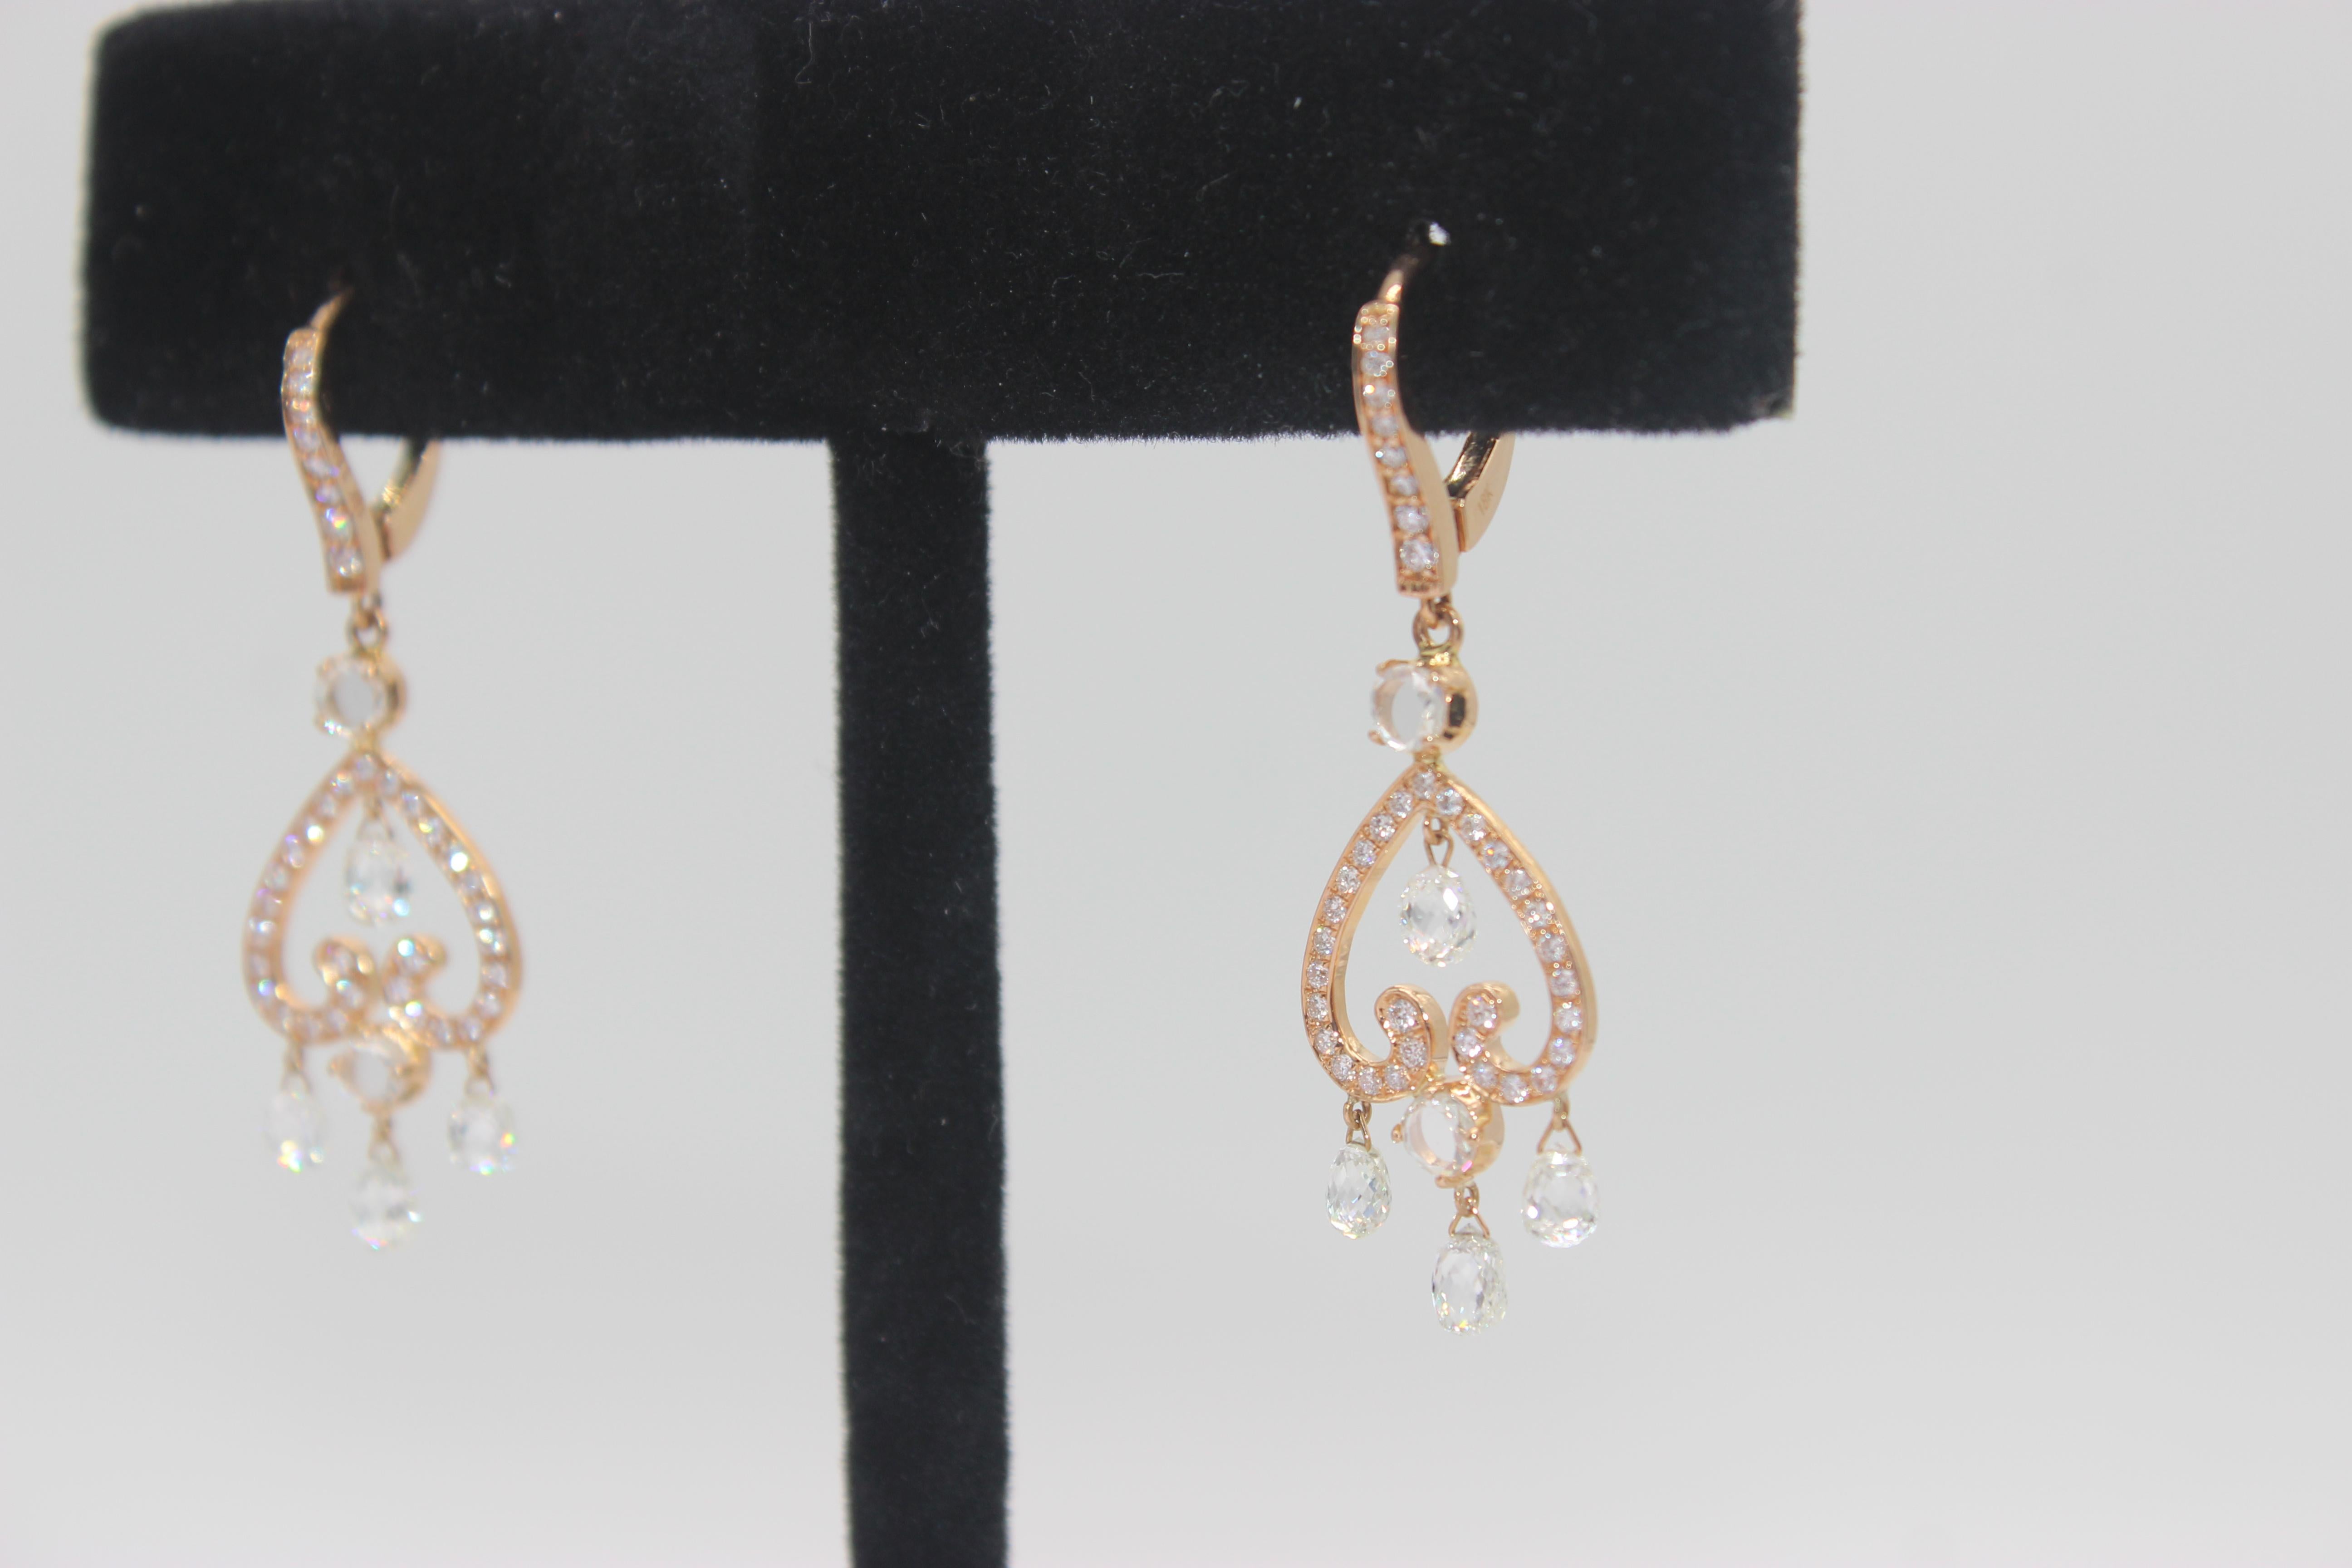 In the shape of Heart , this earrings is special for your loved having the briolette drops and porttrait cut diamond.This pair of Diamond Briolette earrings ,features clusters of Portrait-cut diamond and dangling briolette-cut diamonds, surrounded